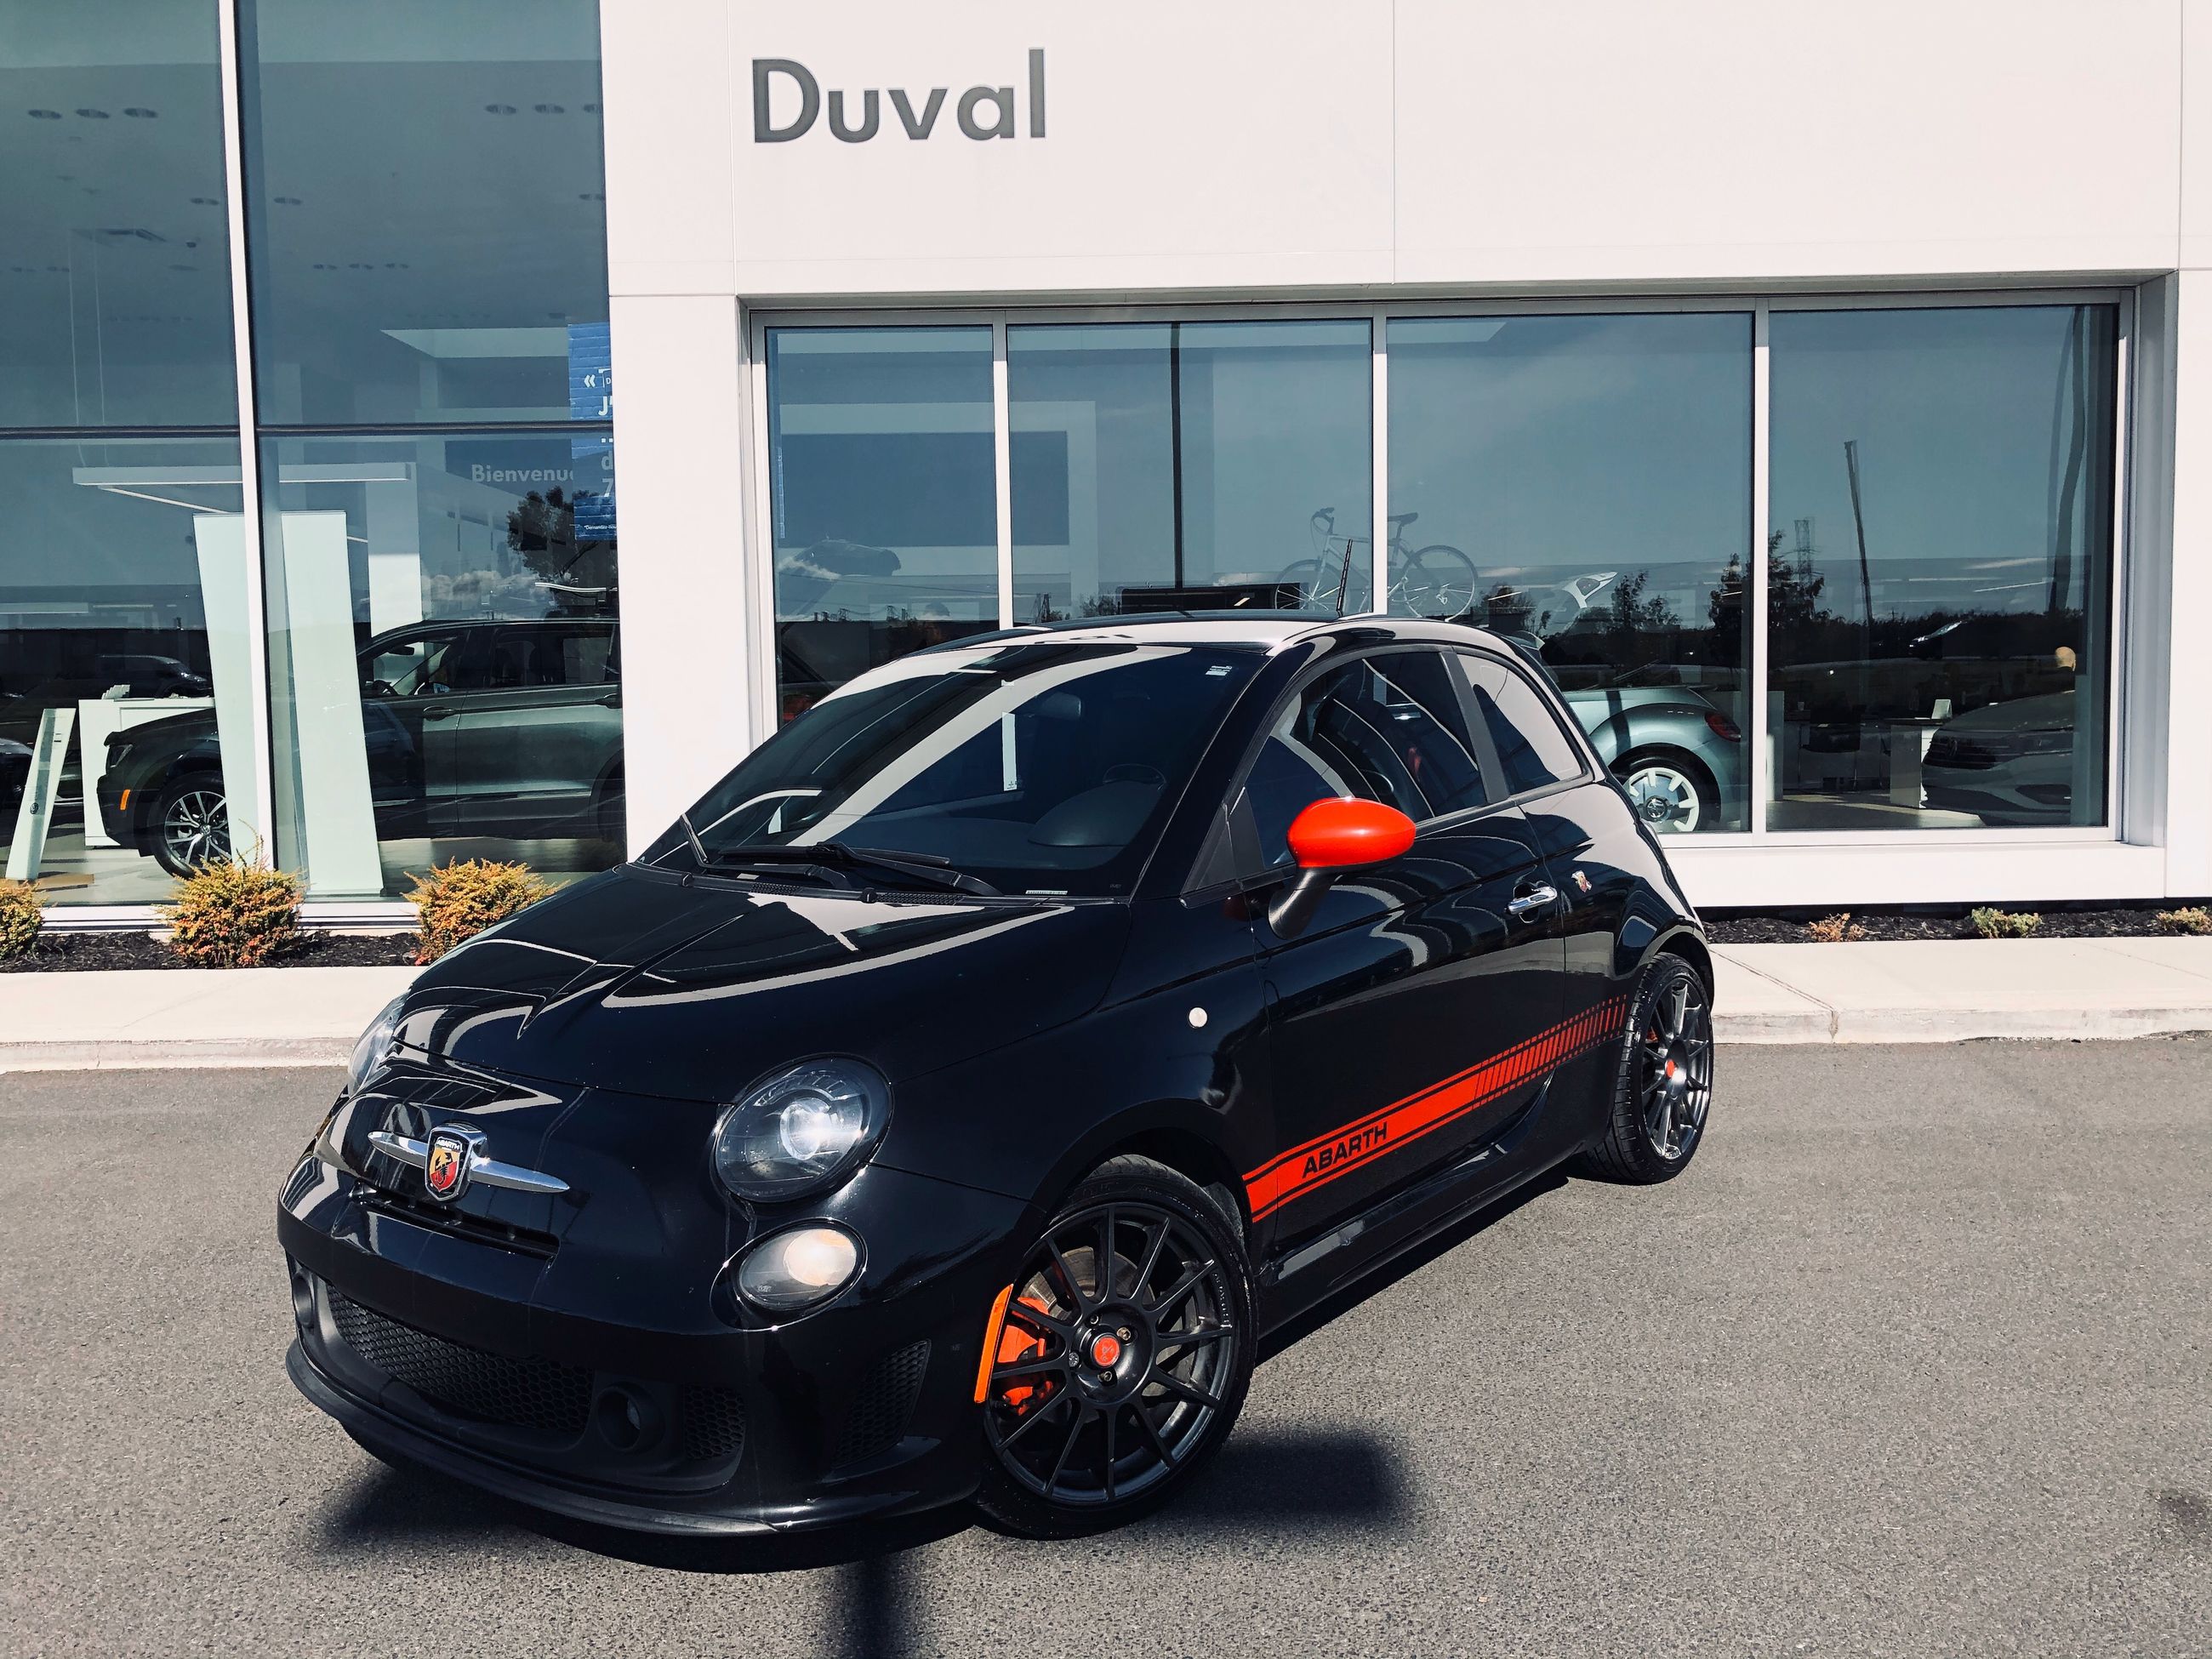 Used 14 Fiat 500 Abarth 1 4l Turbo Cruise Control Bluetooth For Sale 95 0 Duval Volkswagen